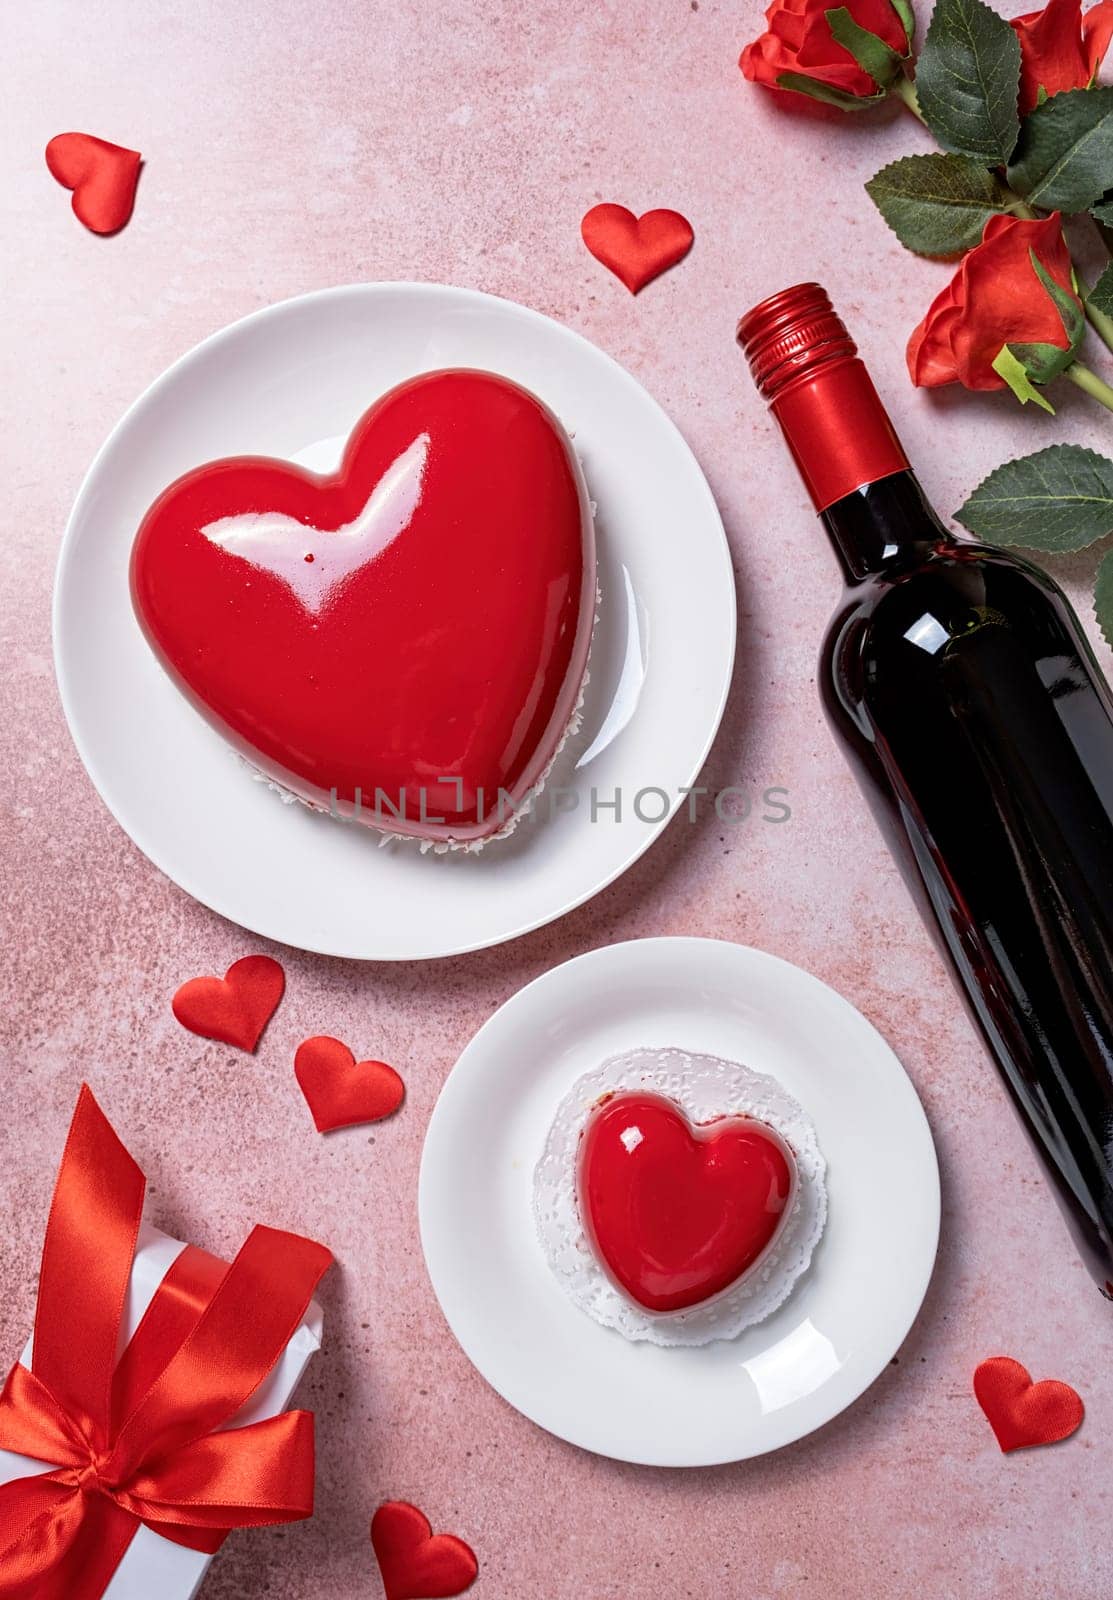 Valentines day. heart shaped glazed valentine cake, gift and wine on pink concrete background